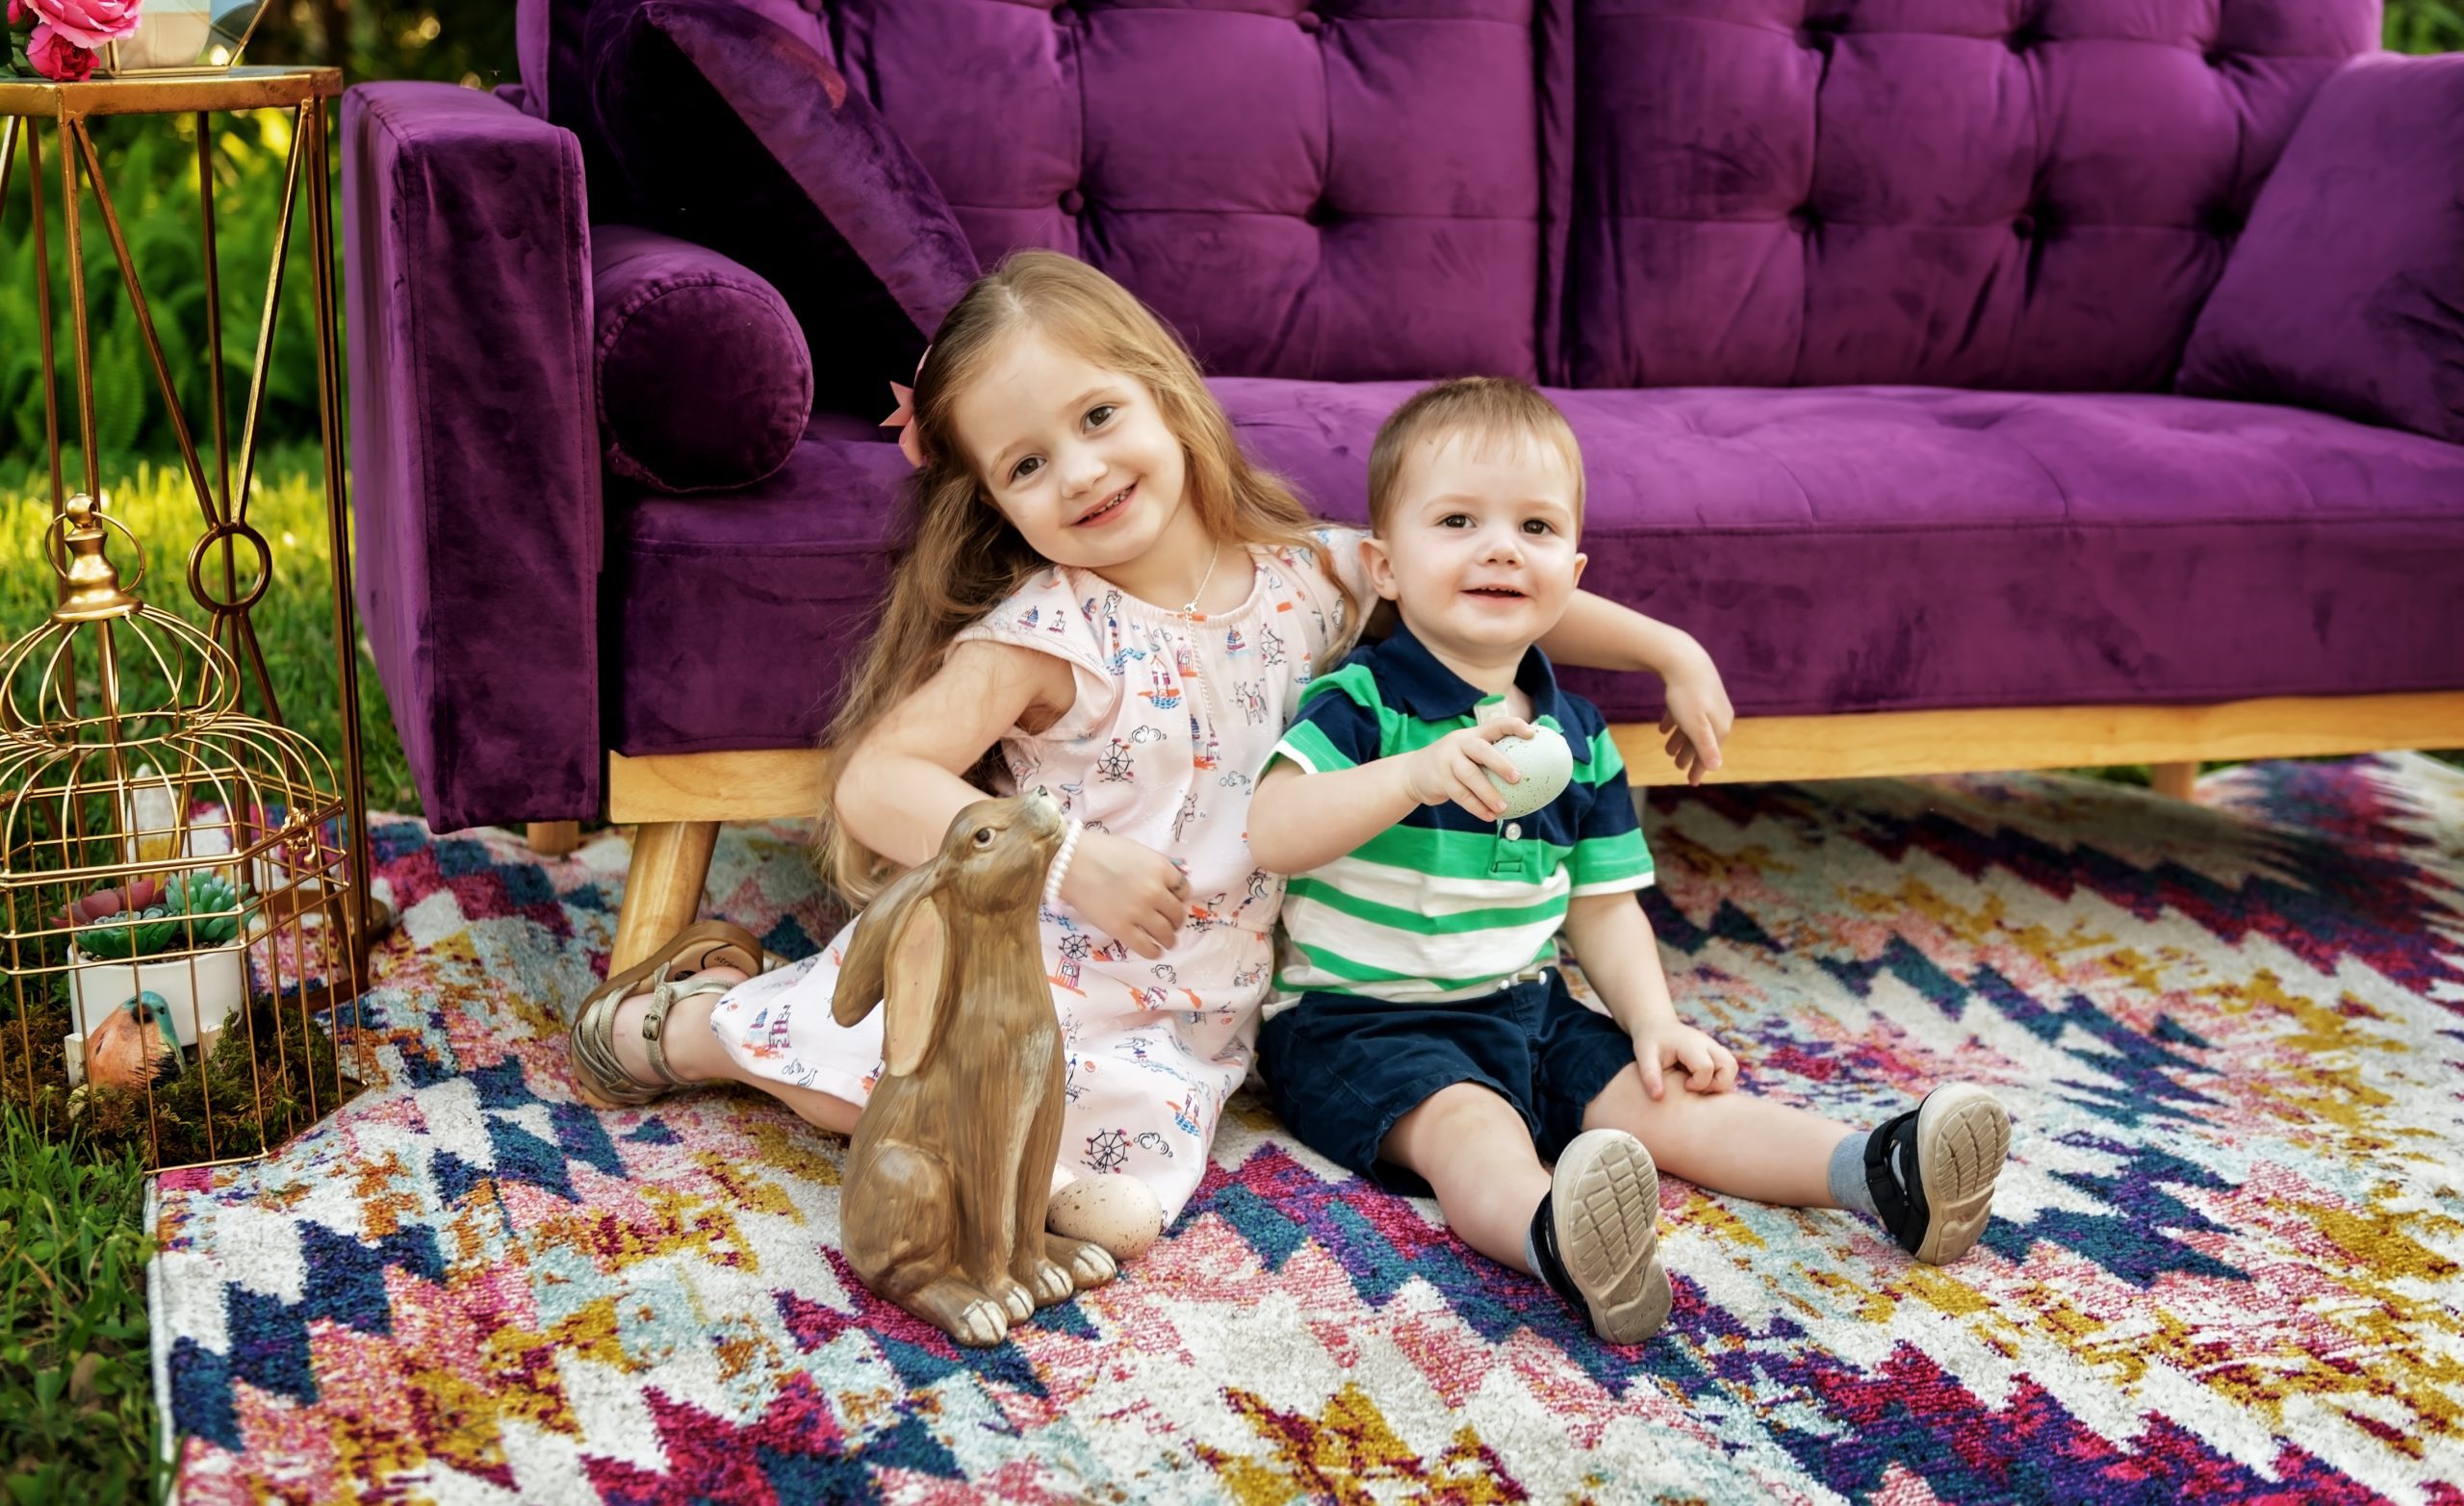 Kate Sherwin's kids (Lyla and Noah) on Easter in front of a purple couch